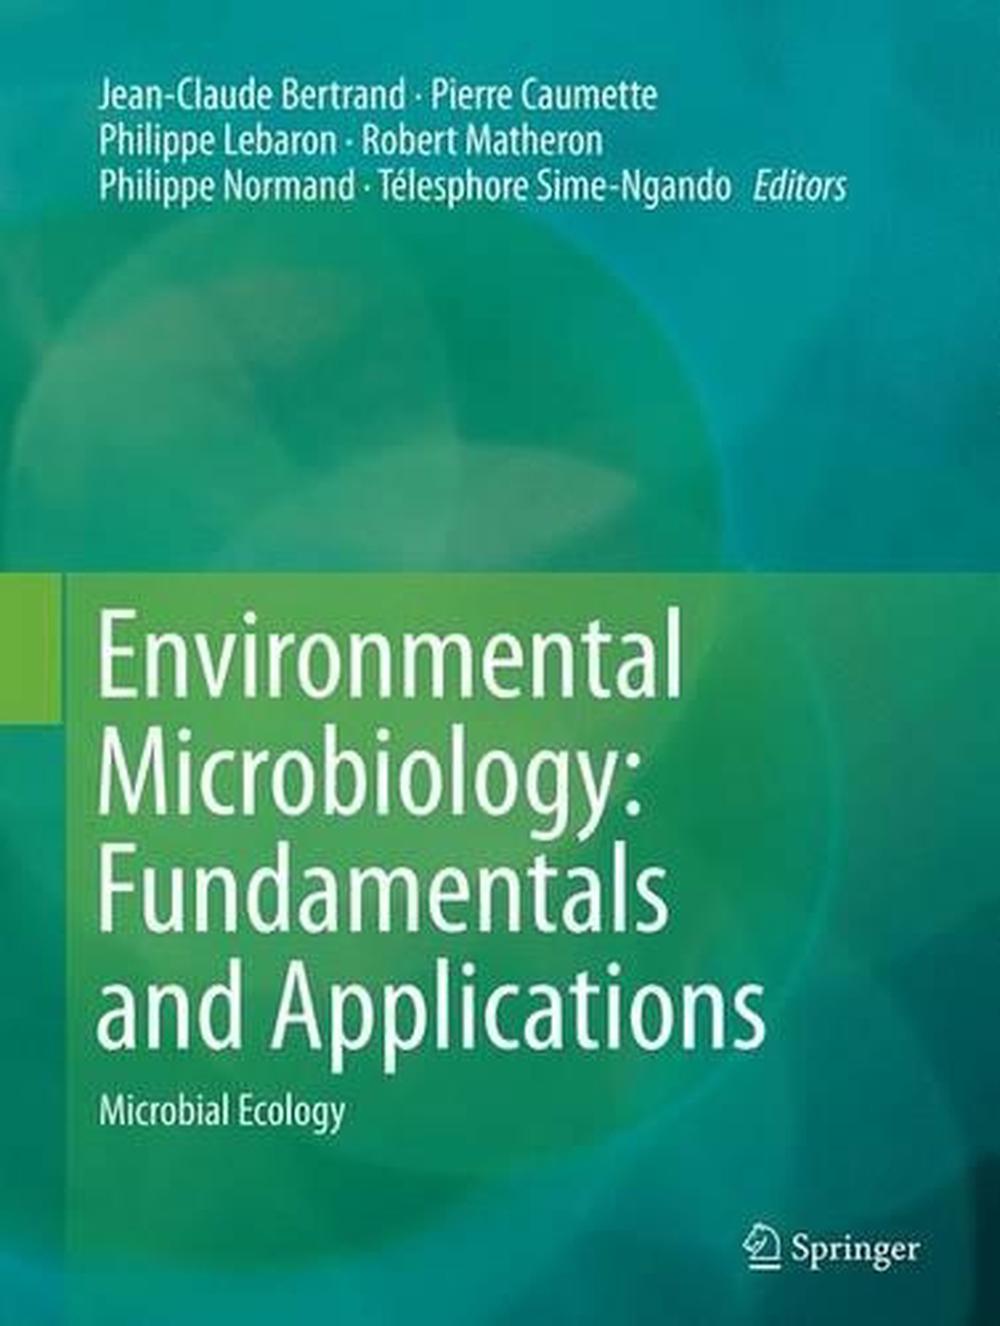 environmental microbiology research papers